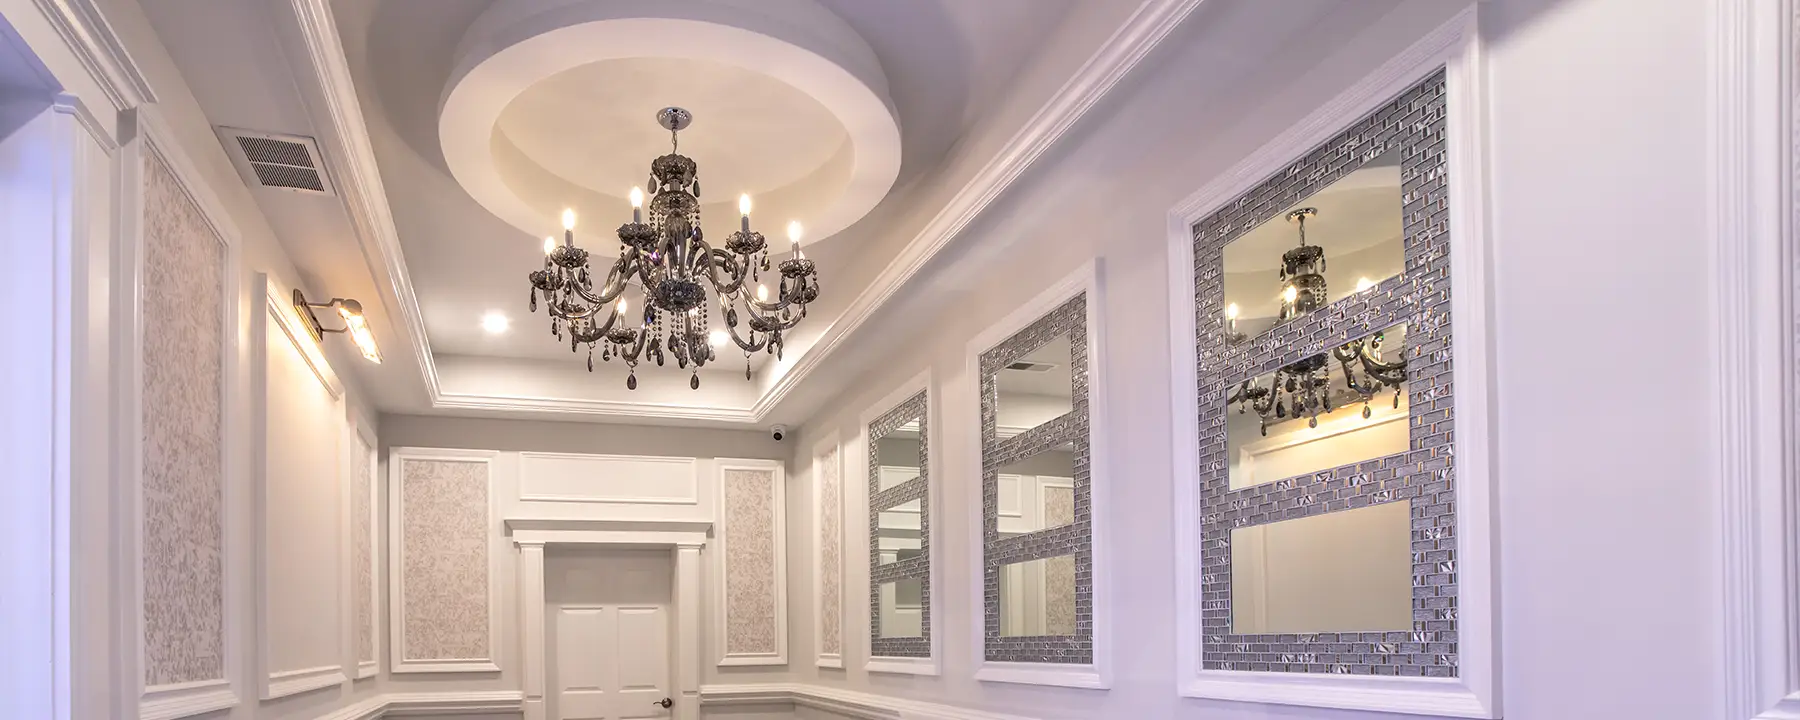 Entryway with chandelier